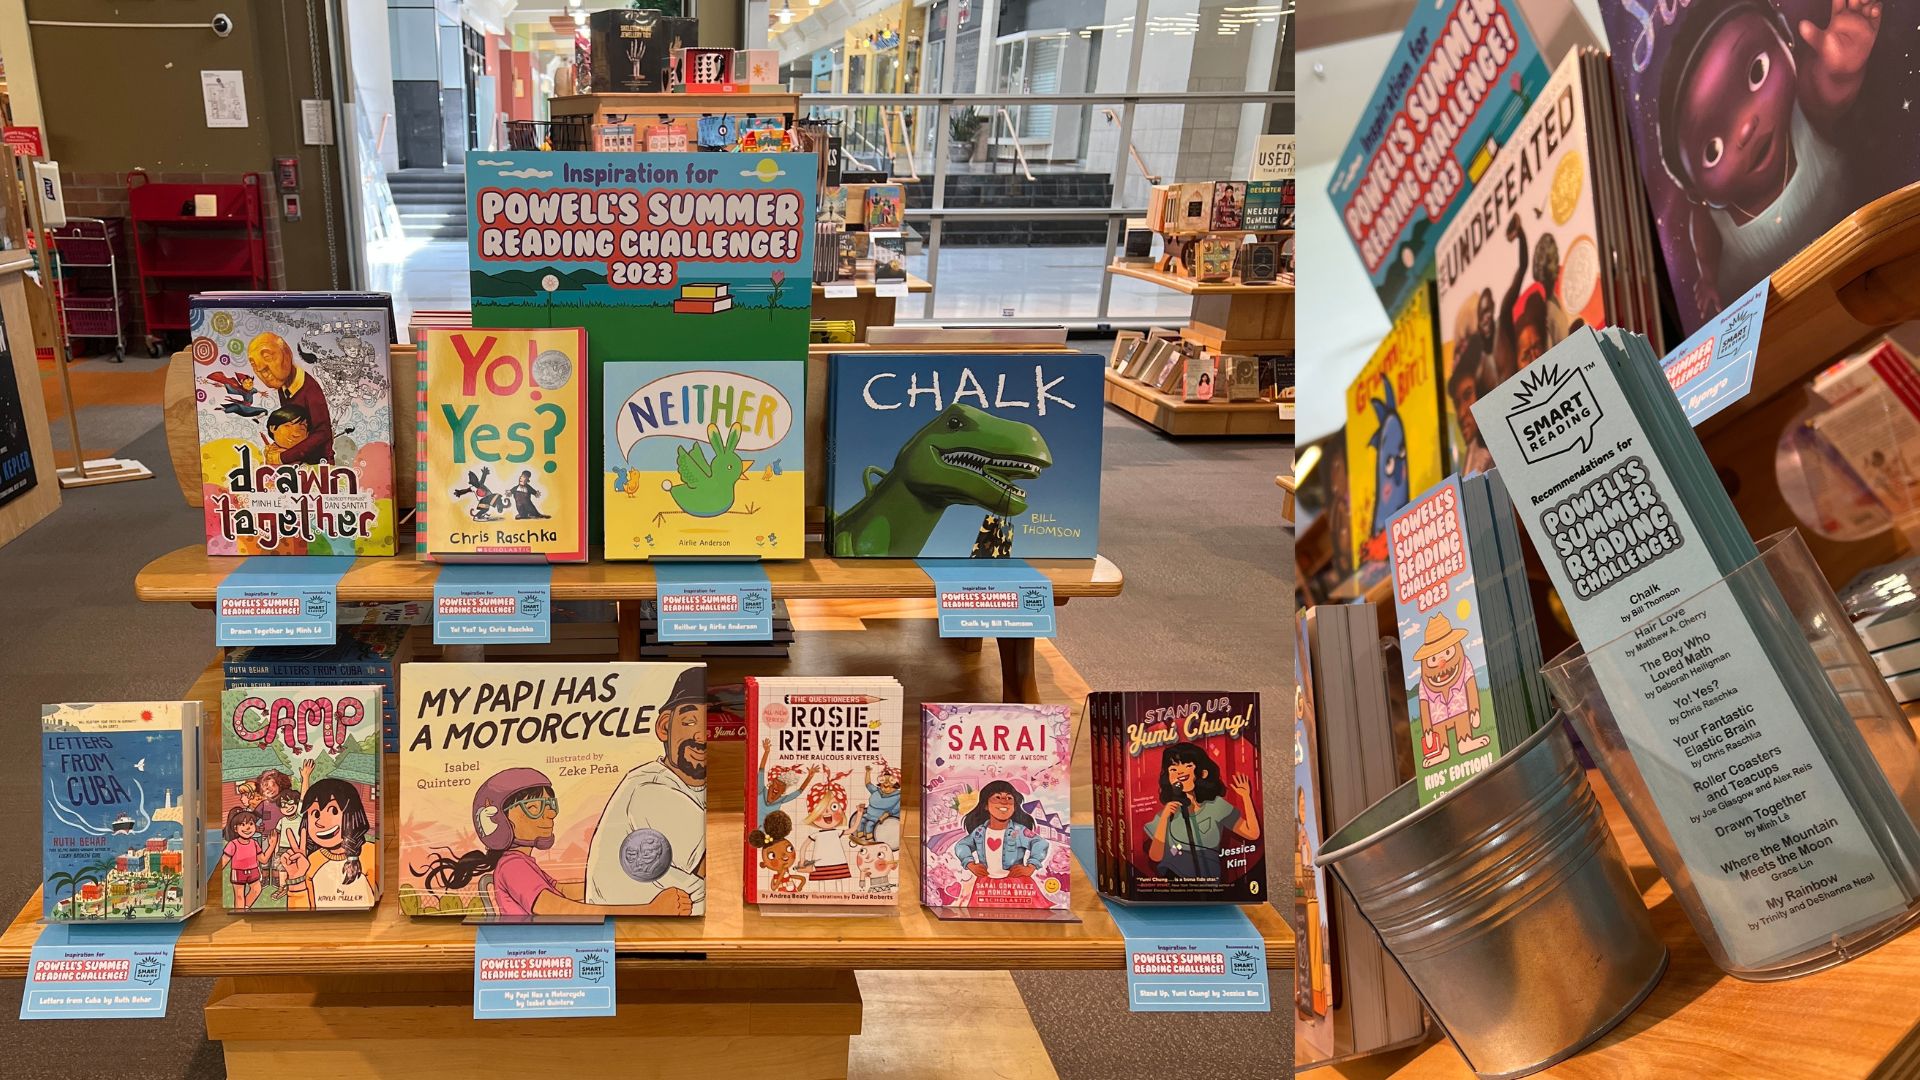 Recommended books and bookmark on display for the Powell's summer reading challenge.